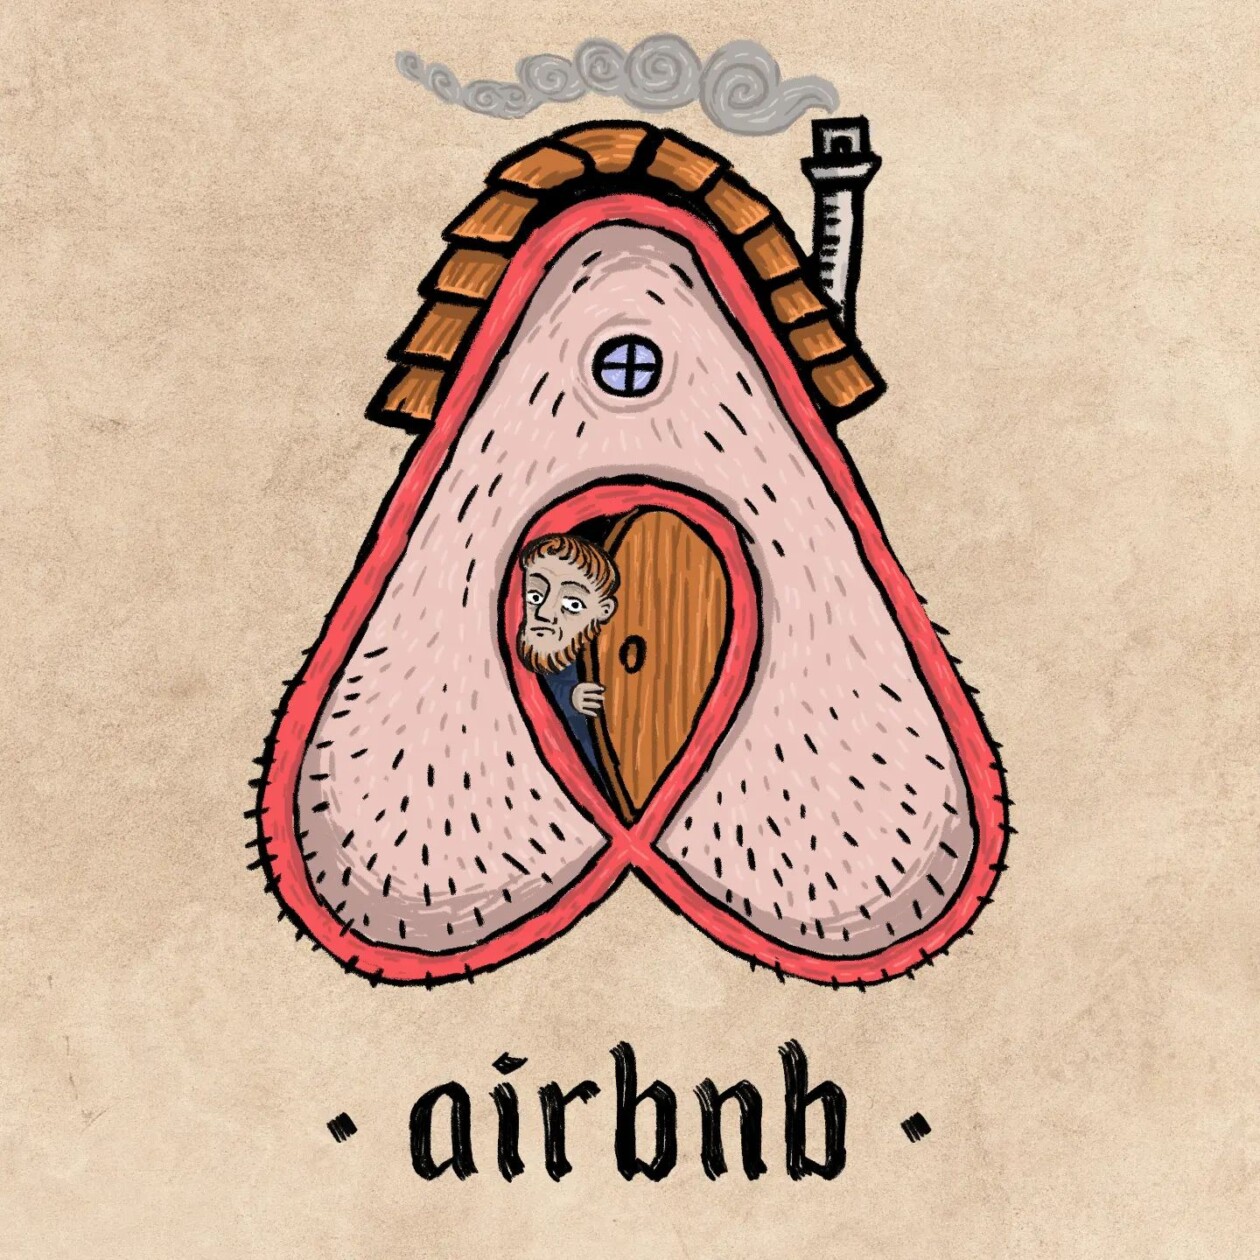 Modern Company Logos Recreated Like They Were Done During The Middle Ages By Ilya Stallone 15